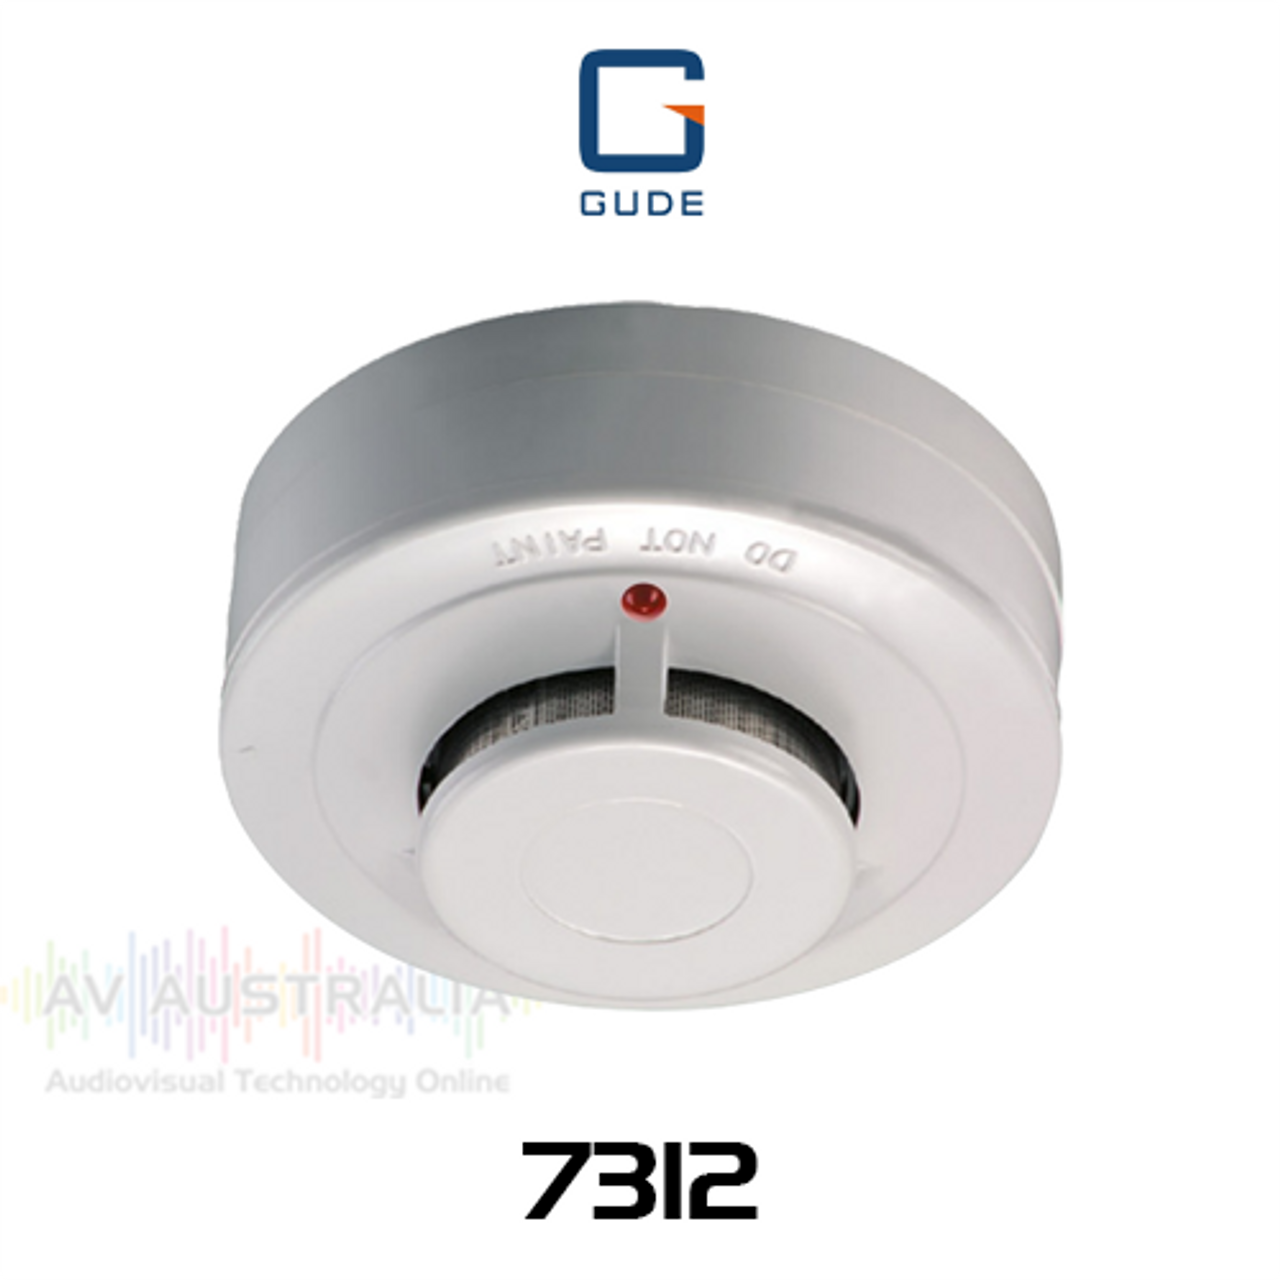 GUDE Thermal Fire Detector with Industrial Clamp